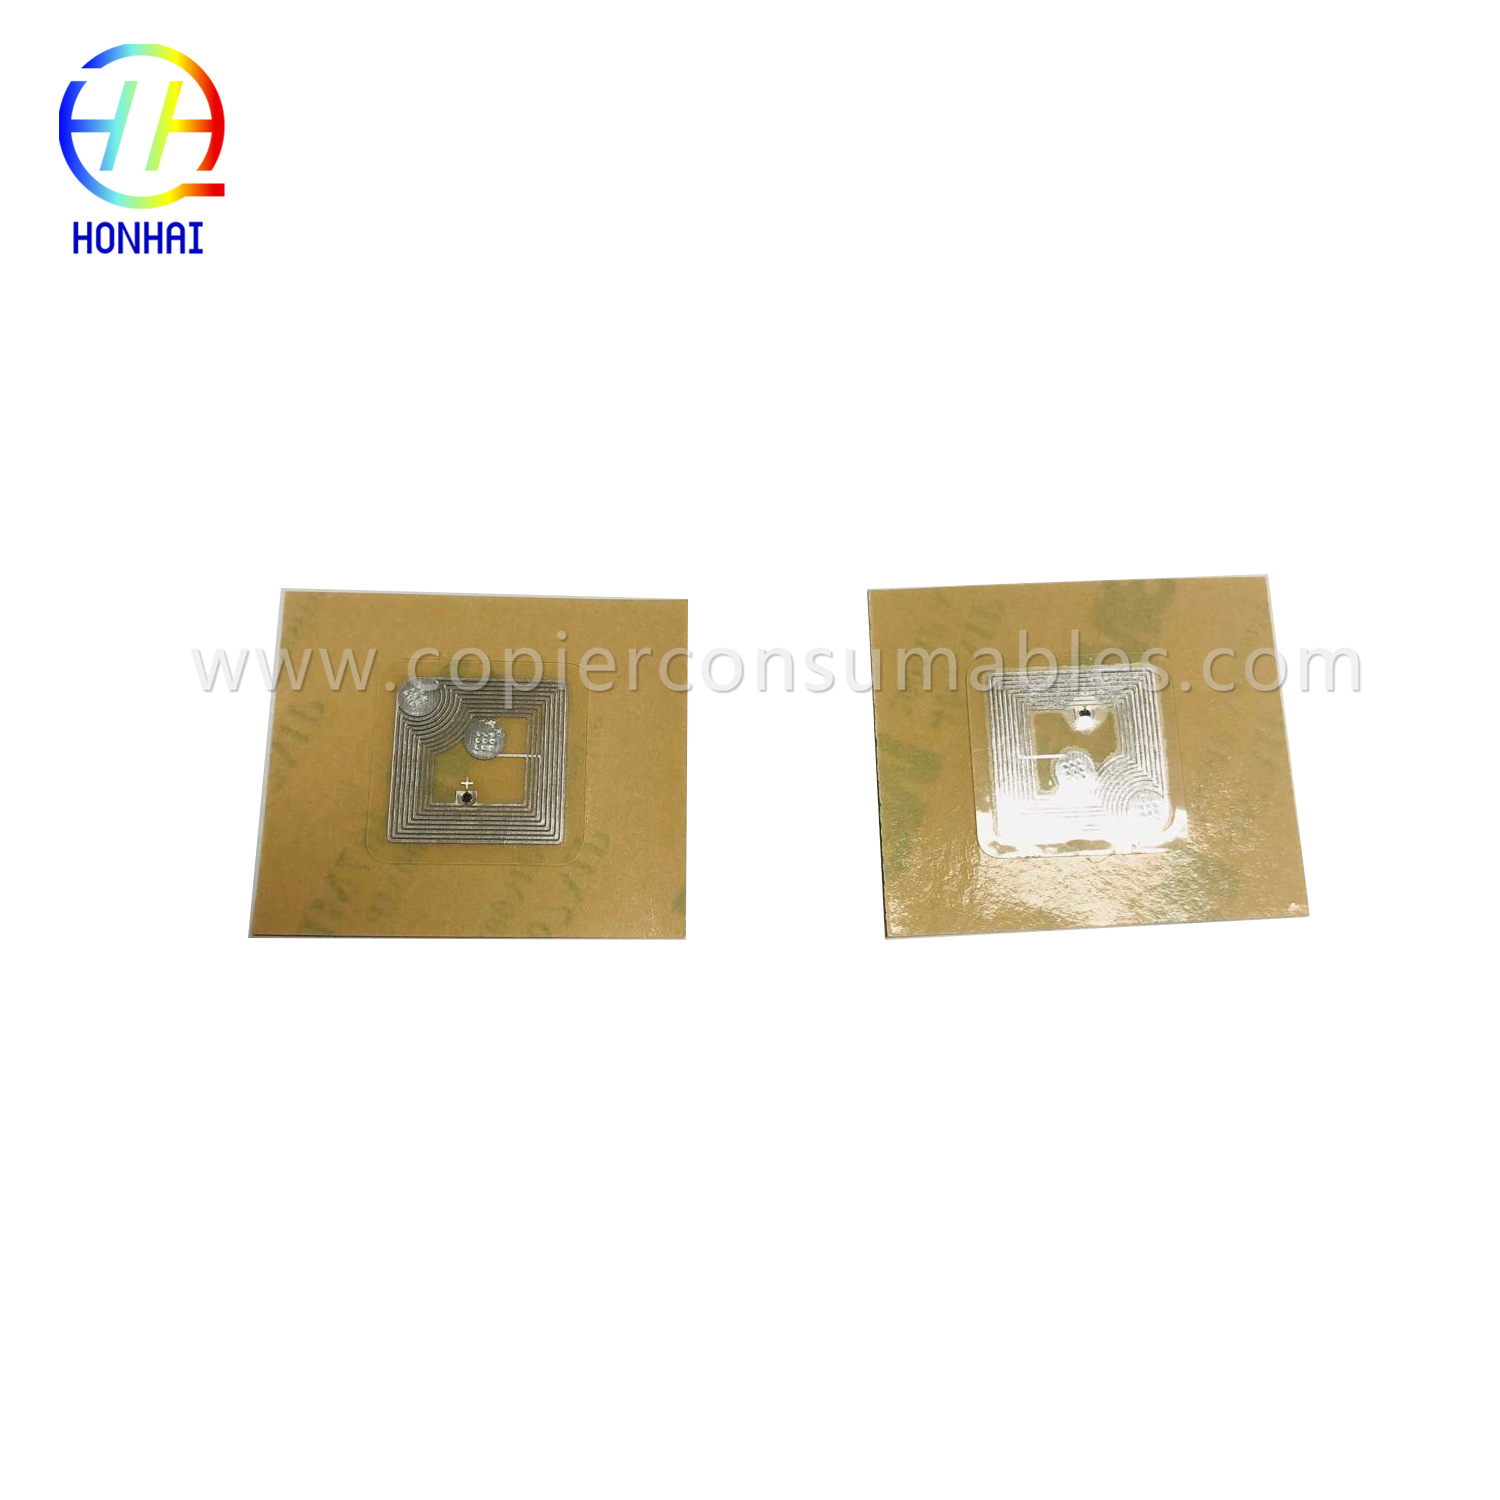 Toner Chip for Xerox Workcentre 5945 5955 006R01606